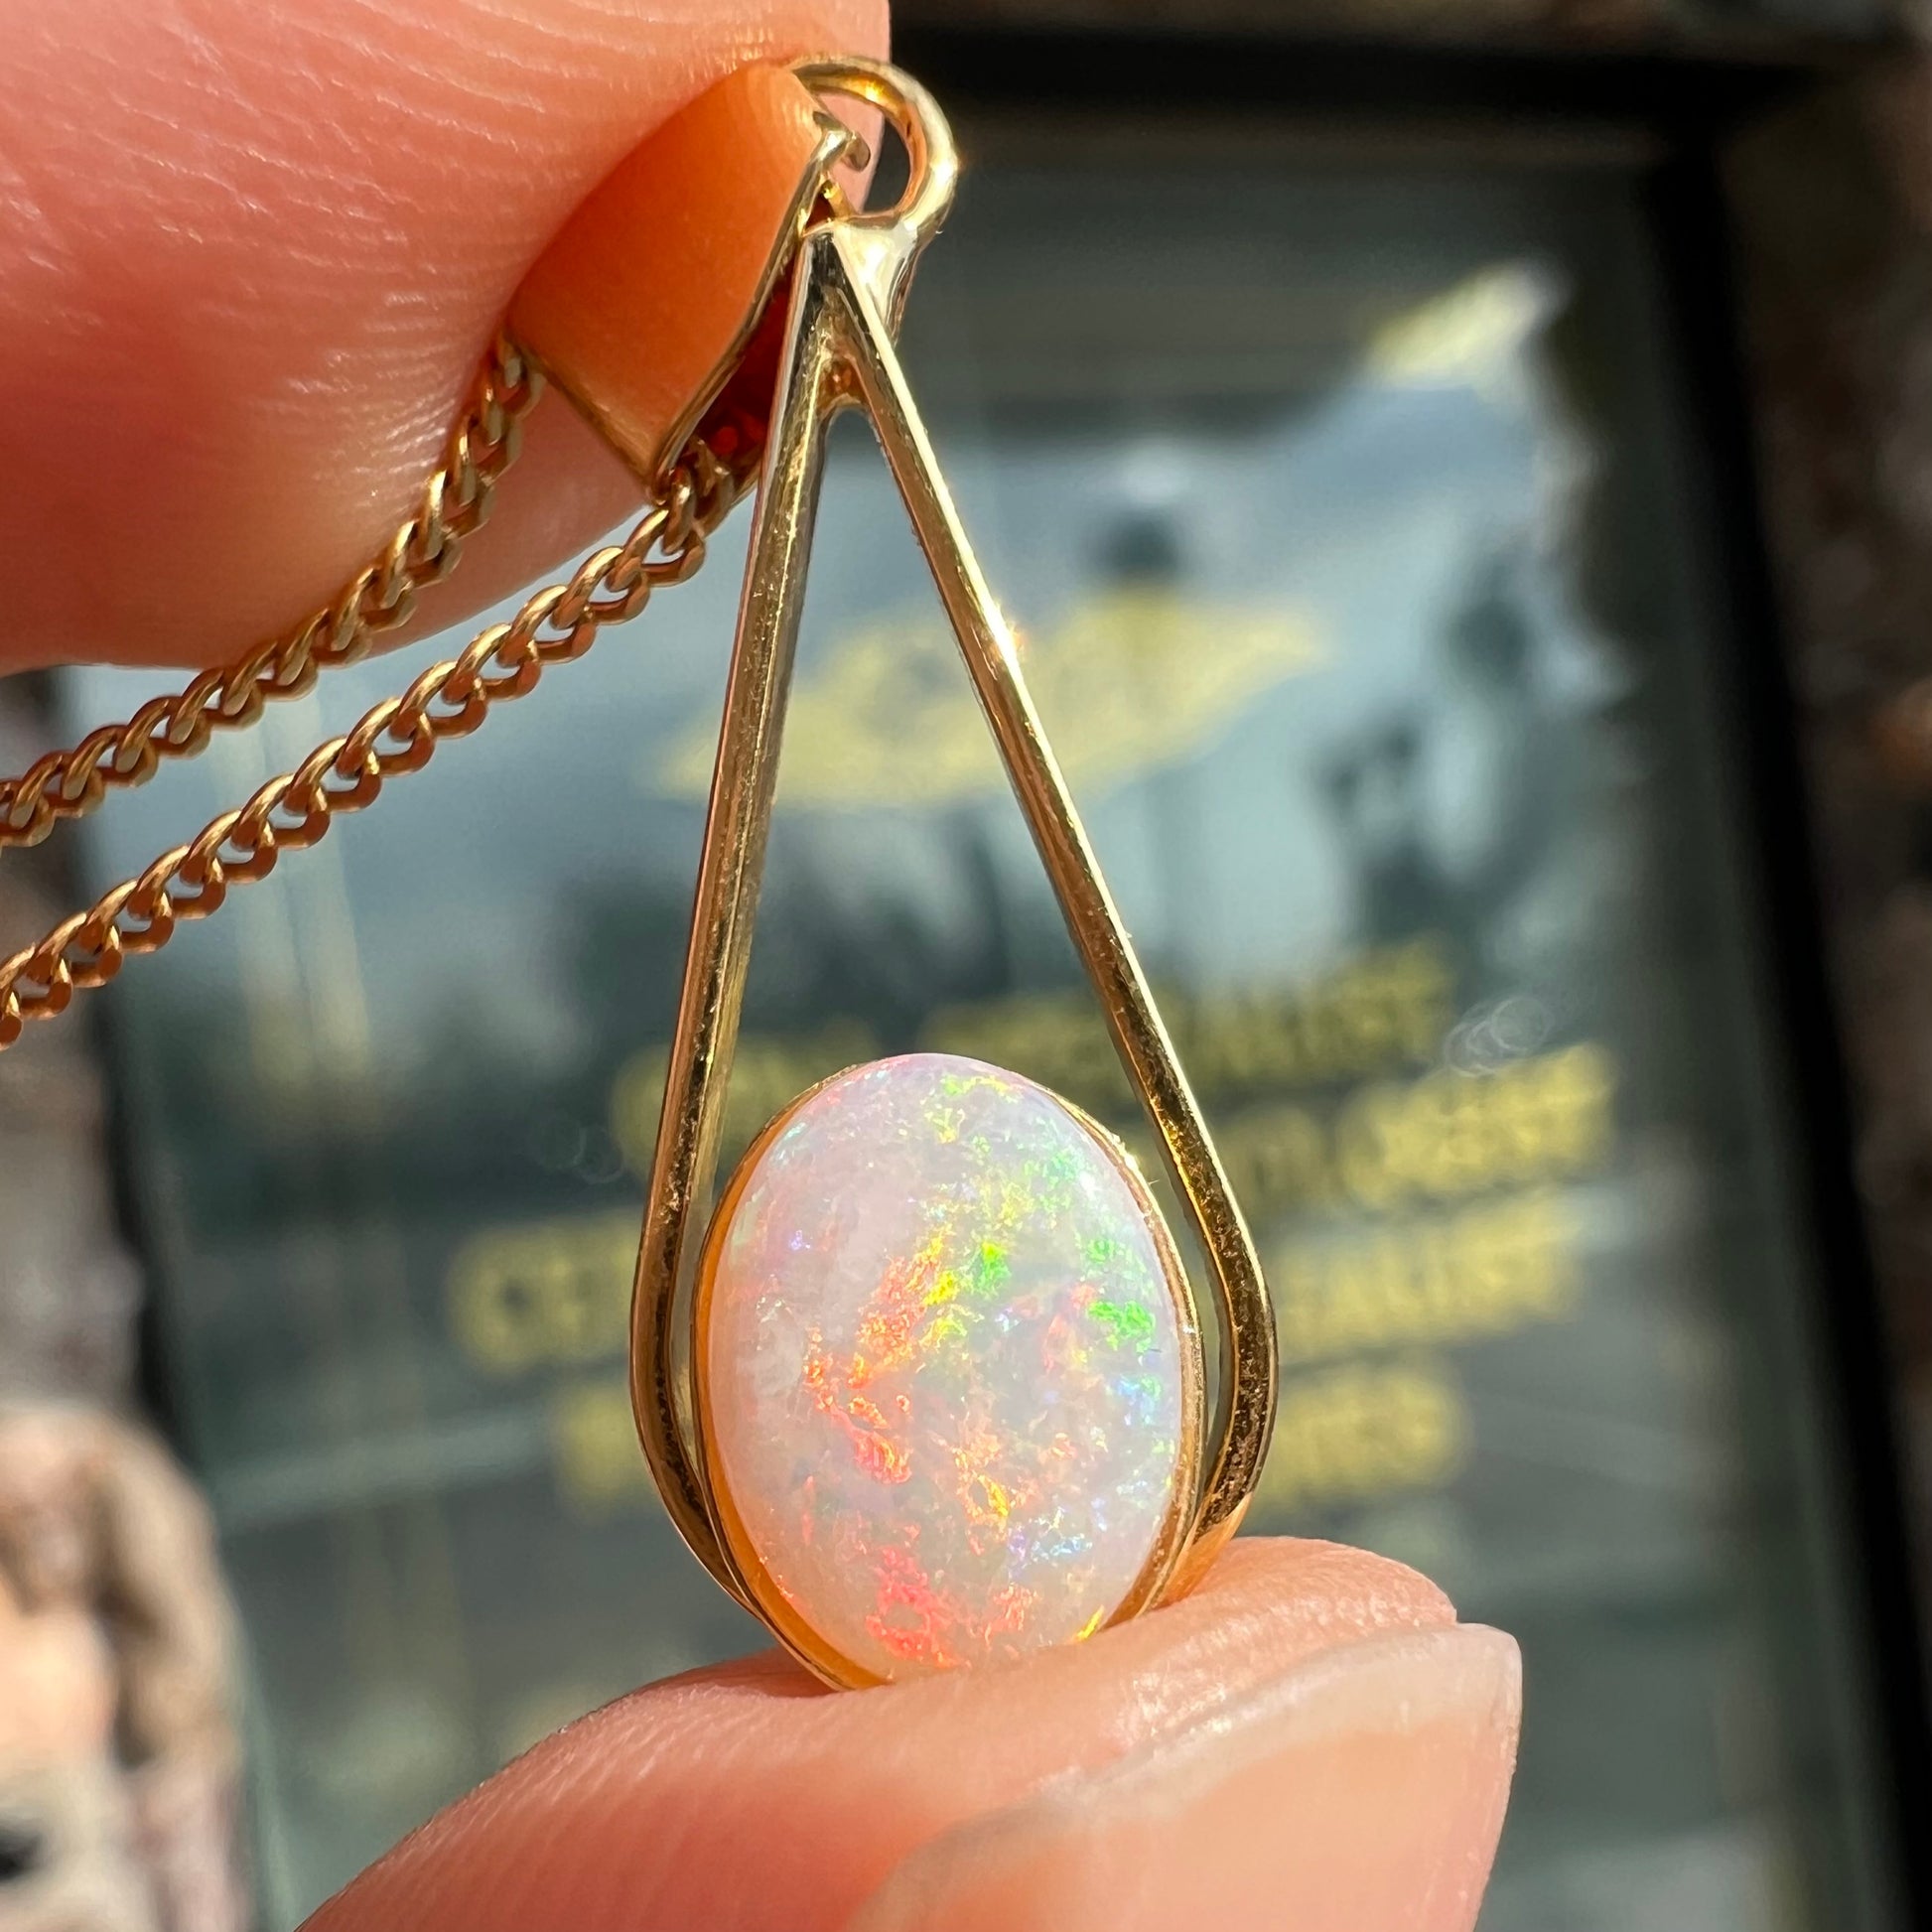 A gold plated necklace set with a natural white crystal opal.  The opal shines pinkish red and blue colors.